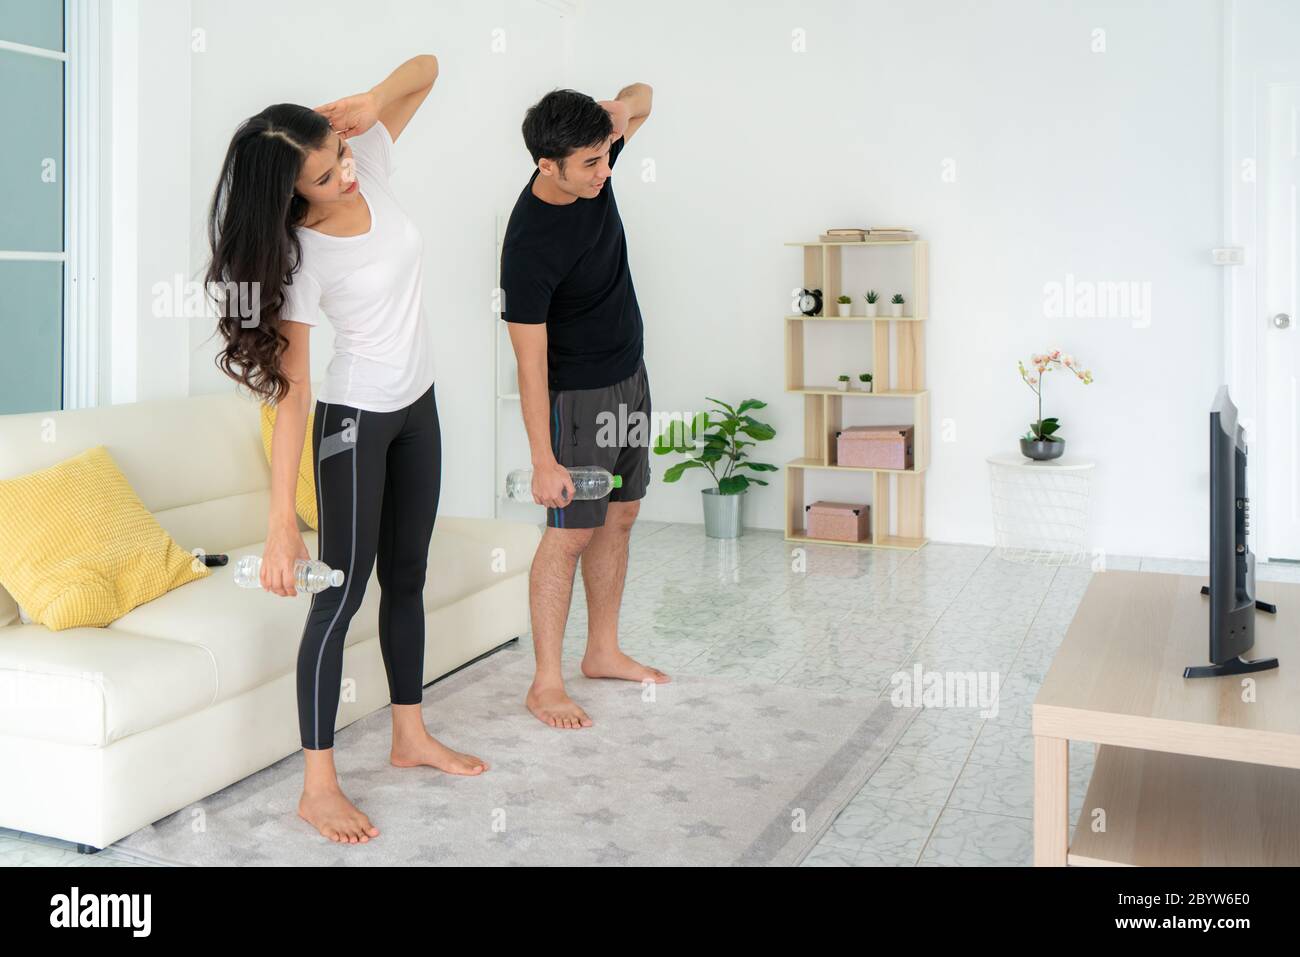 Young Asian couple doing High-intensity interval training together and looking TV at home, man and woman working out together standing in living room, Stock Photo